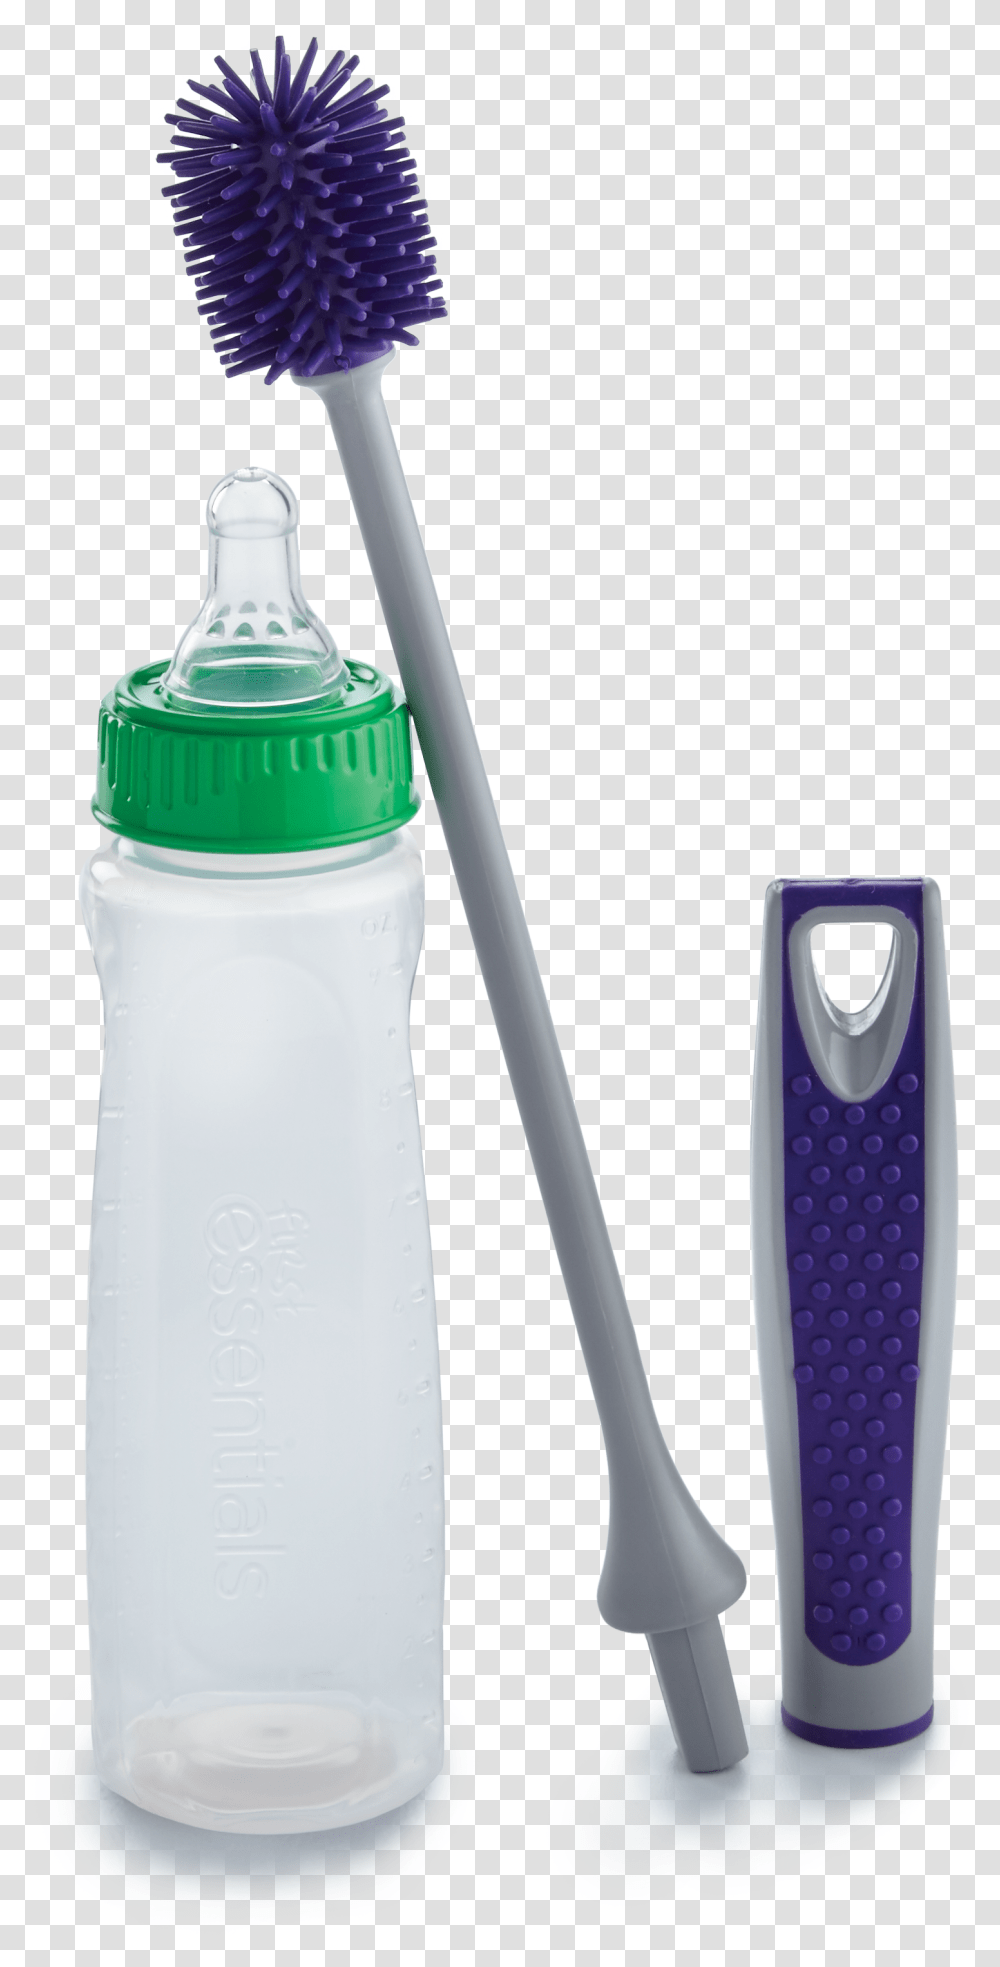 Bottle Brush Extension Baby Bottle Toilet Brush, Mobile Phone, Electronics, Cell Phone, Mixer Transparent Png